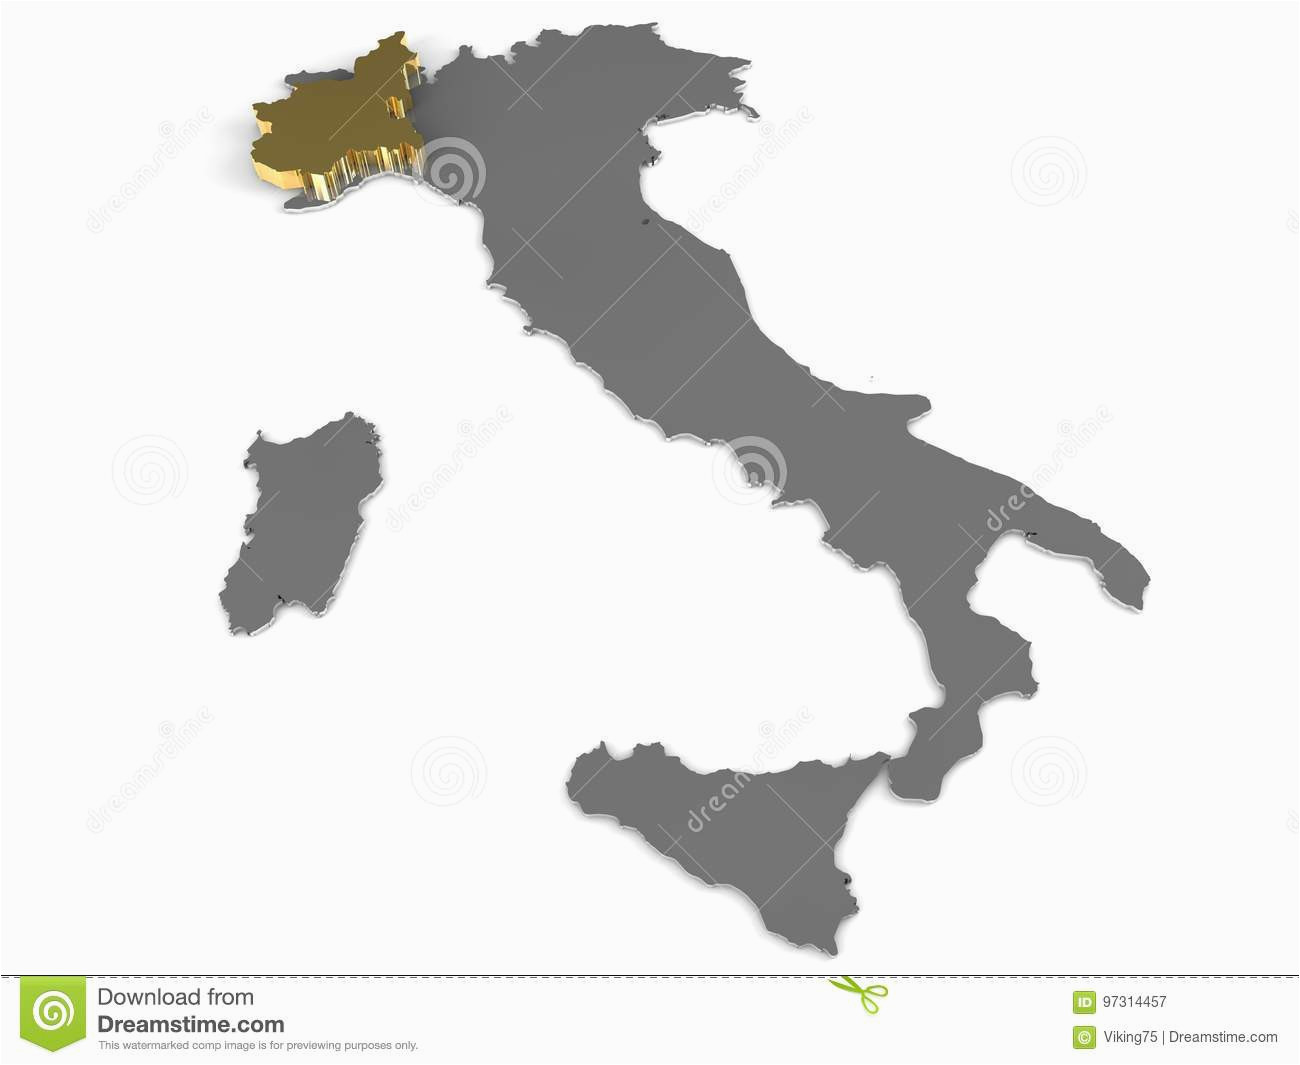 italy 3d metallic map whith piemonte region highlighted stock